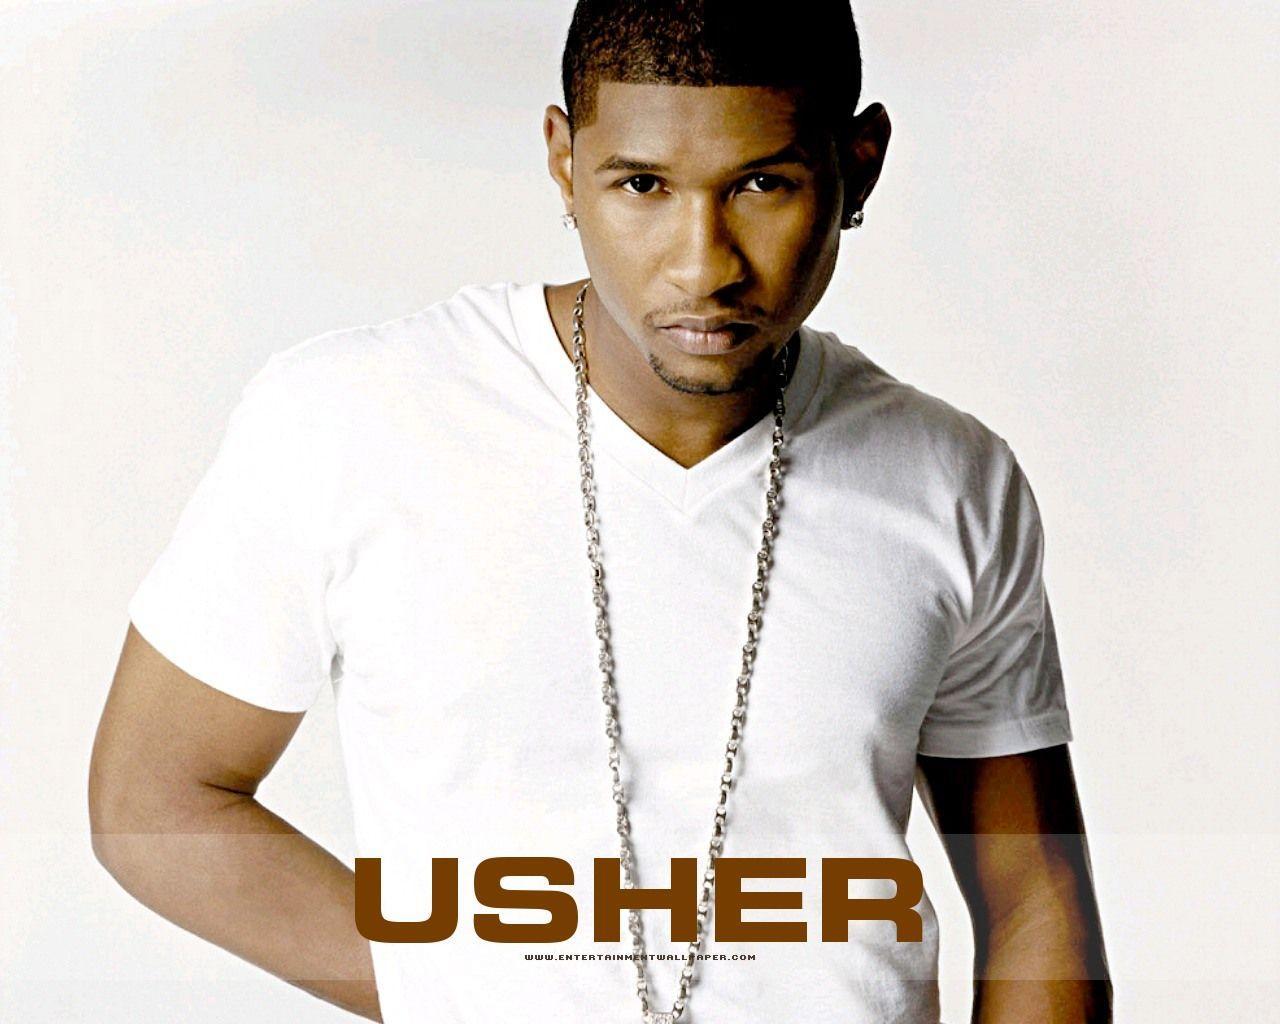 Download wallpapers Usher 4k white neon lights american singer music  stars creative Usher Raymond IV american celebrity superstars Usher 4K  for desktop with resolution 3840x2400 High Quality HD pictures wallpapers